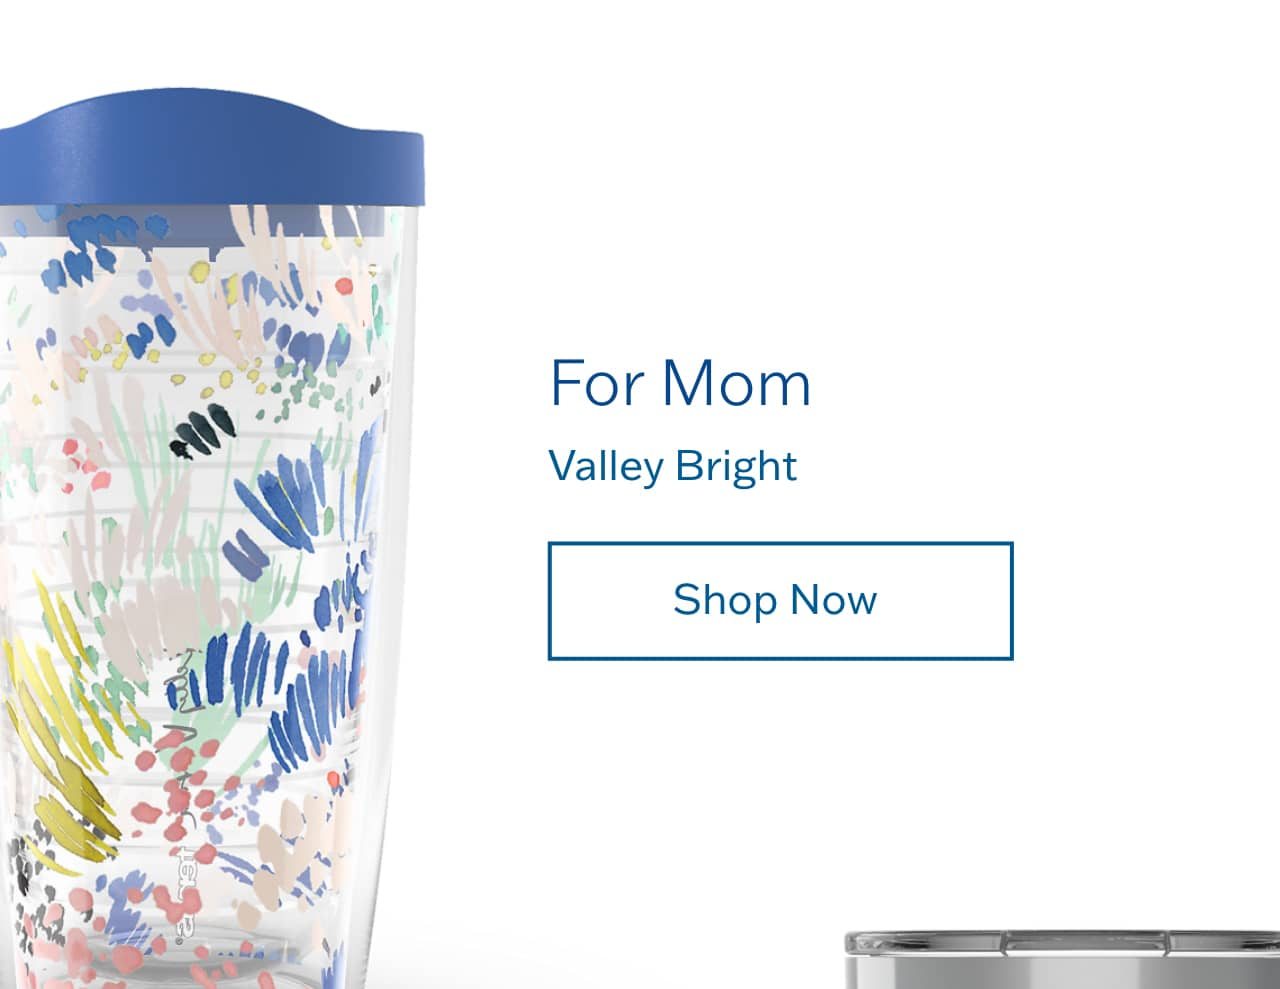 For Mom - Valley Bright - Shop Now